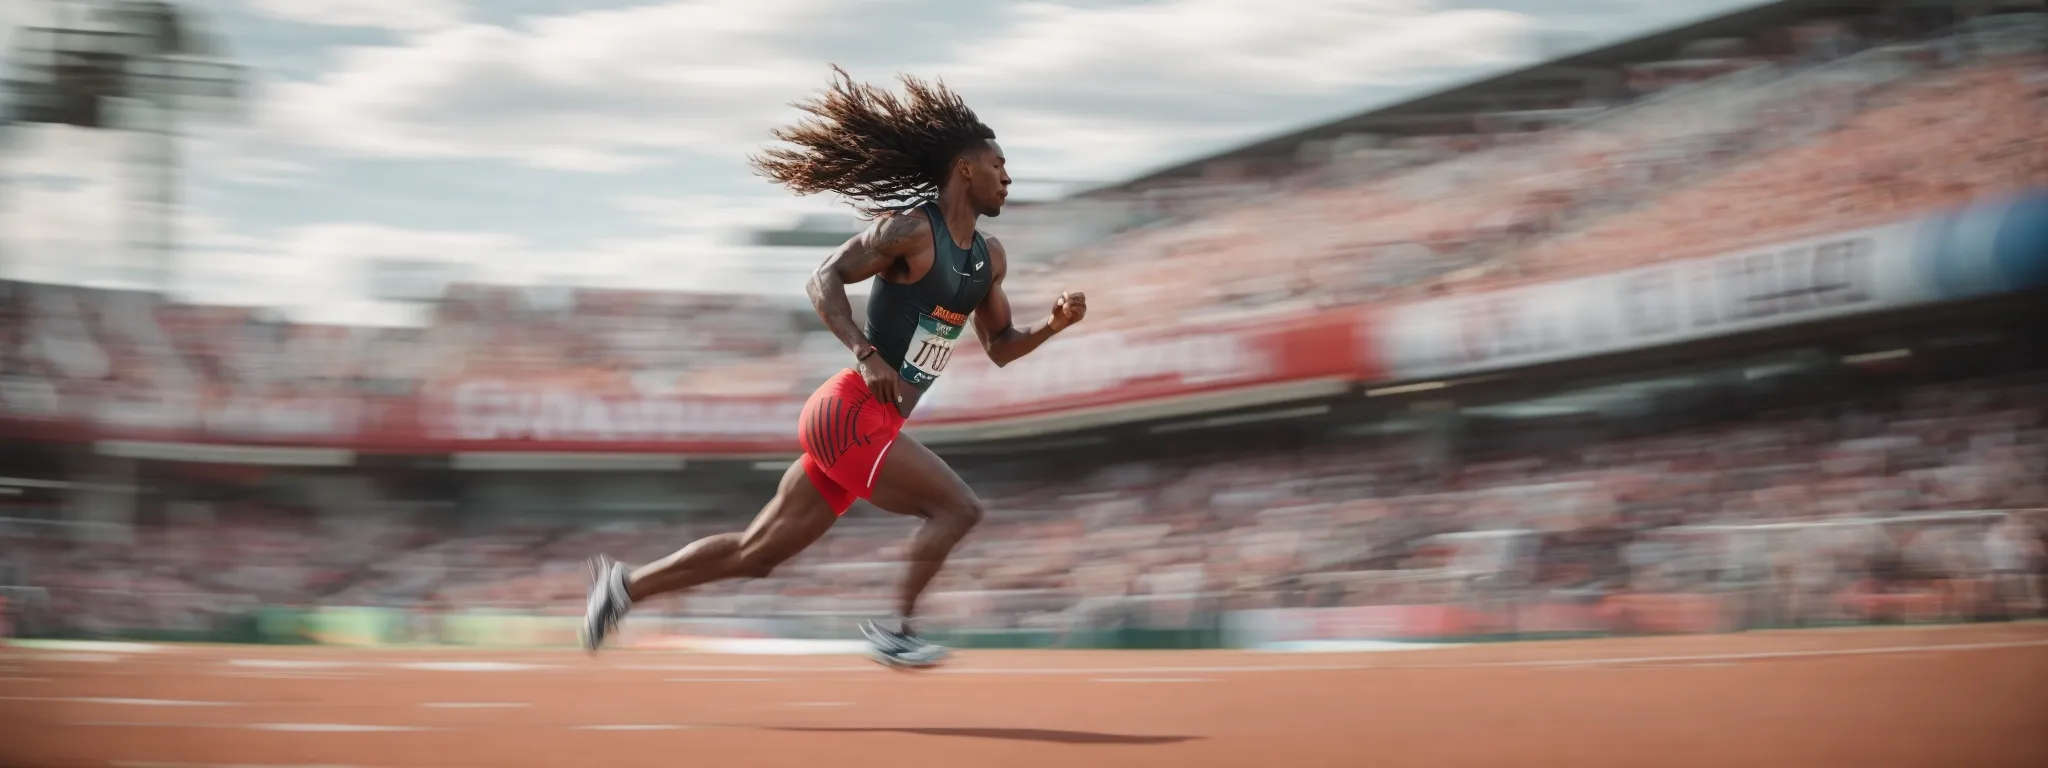 a blur of a sprinter mid-race, embodying the essence of speed and performance.